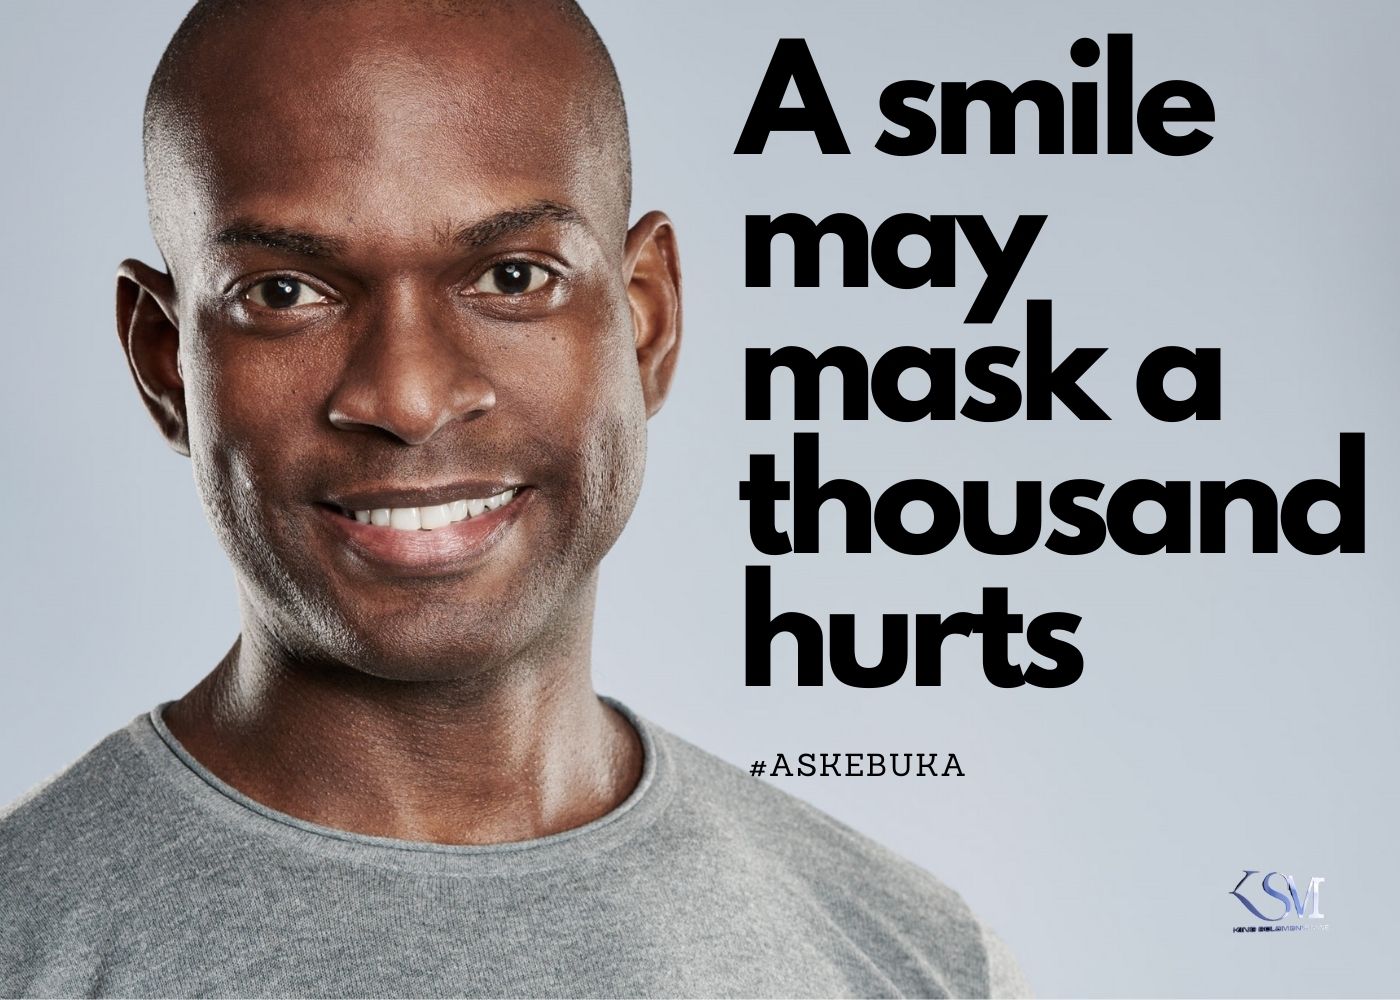 A smile may mask a thousand hurts!